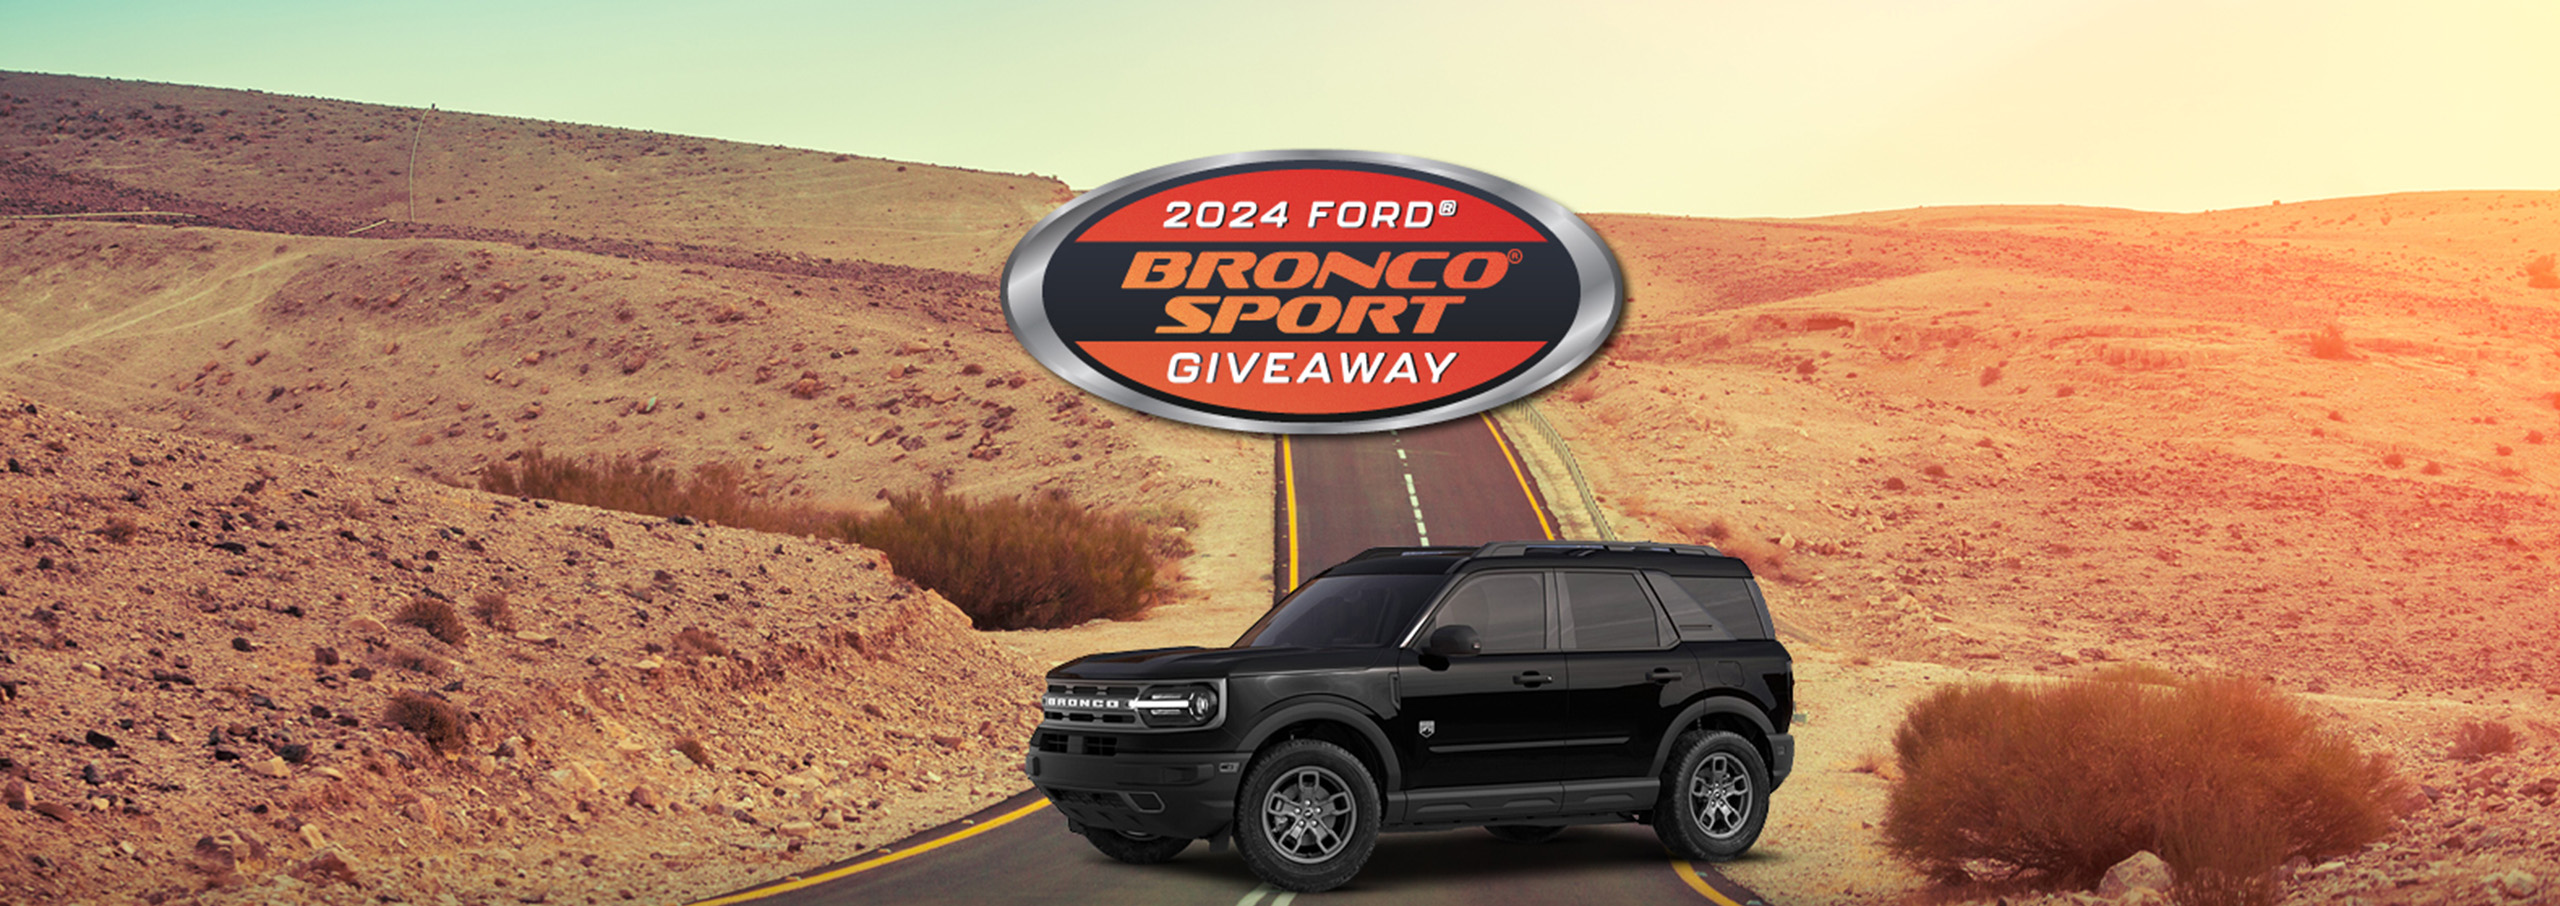 Bronco Ford Giveaway